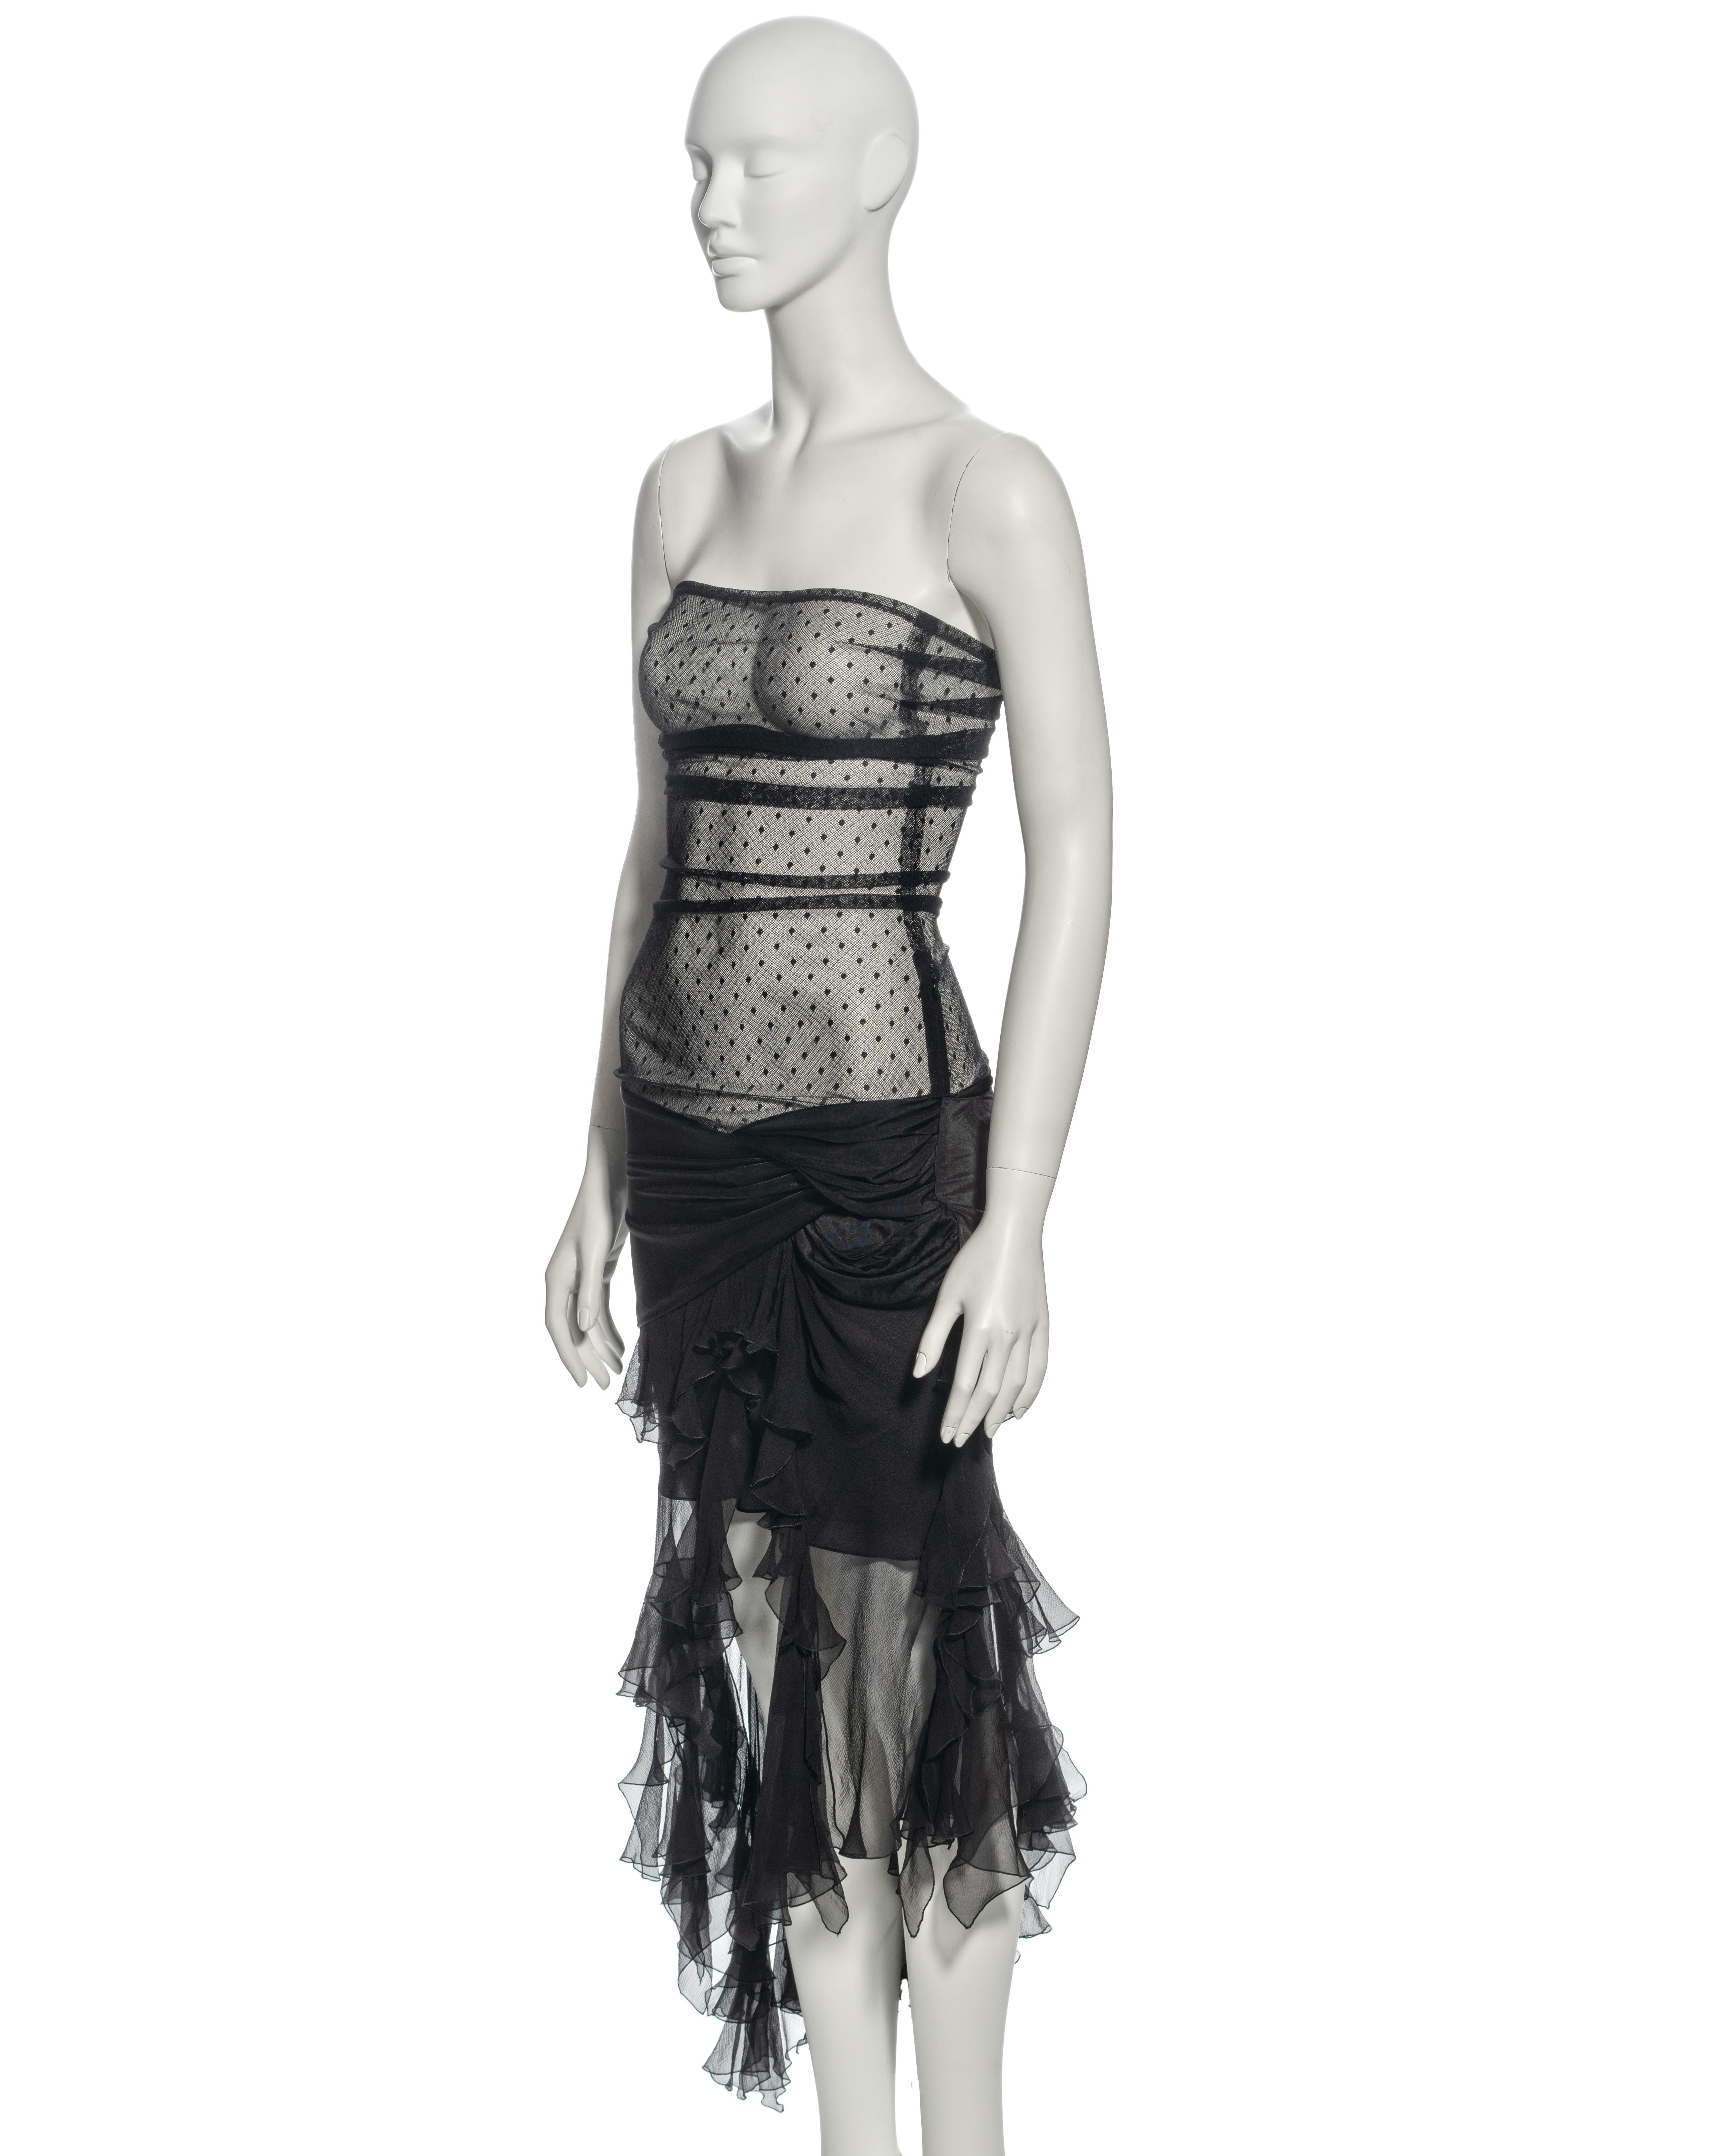 Christian Dior by John Galliano Black Strapless Silk and Mesh Dress, ss 2004 For Sale 3